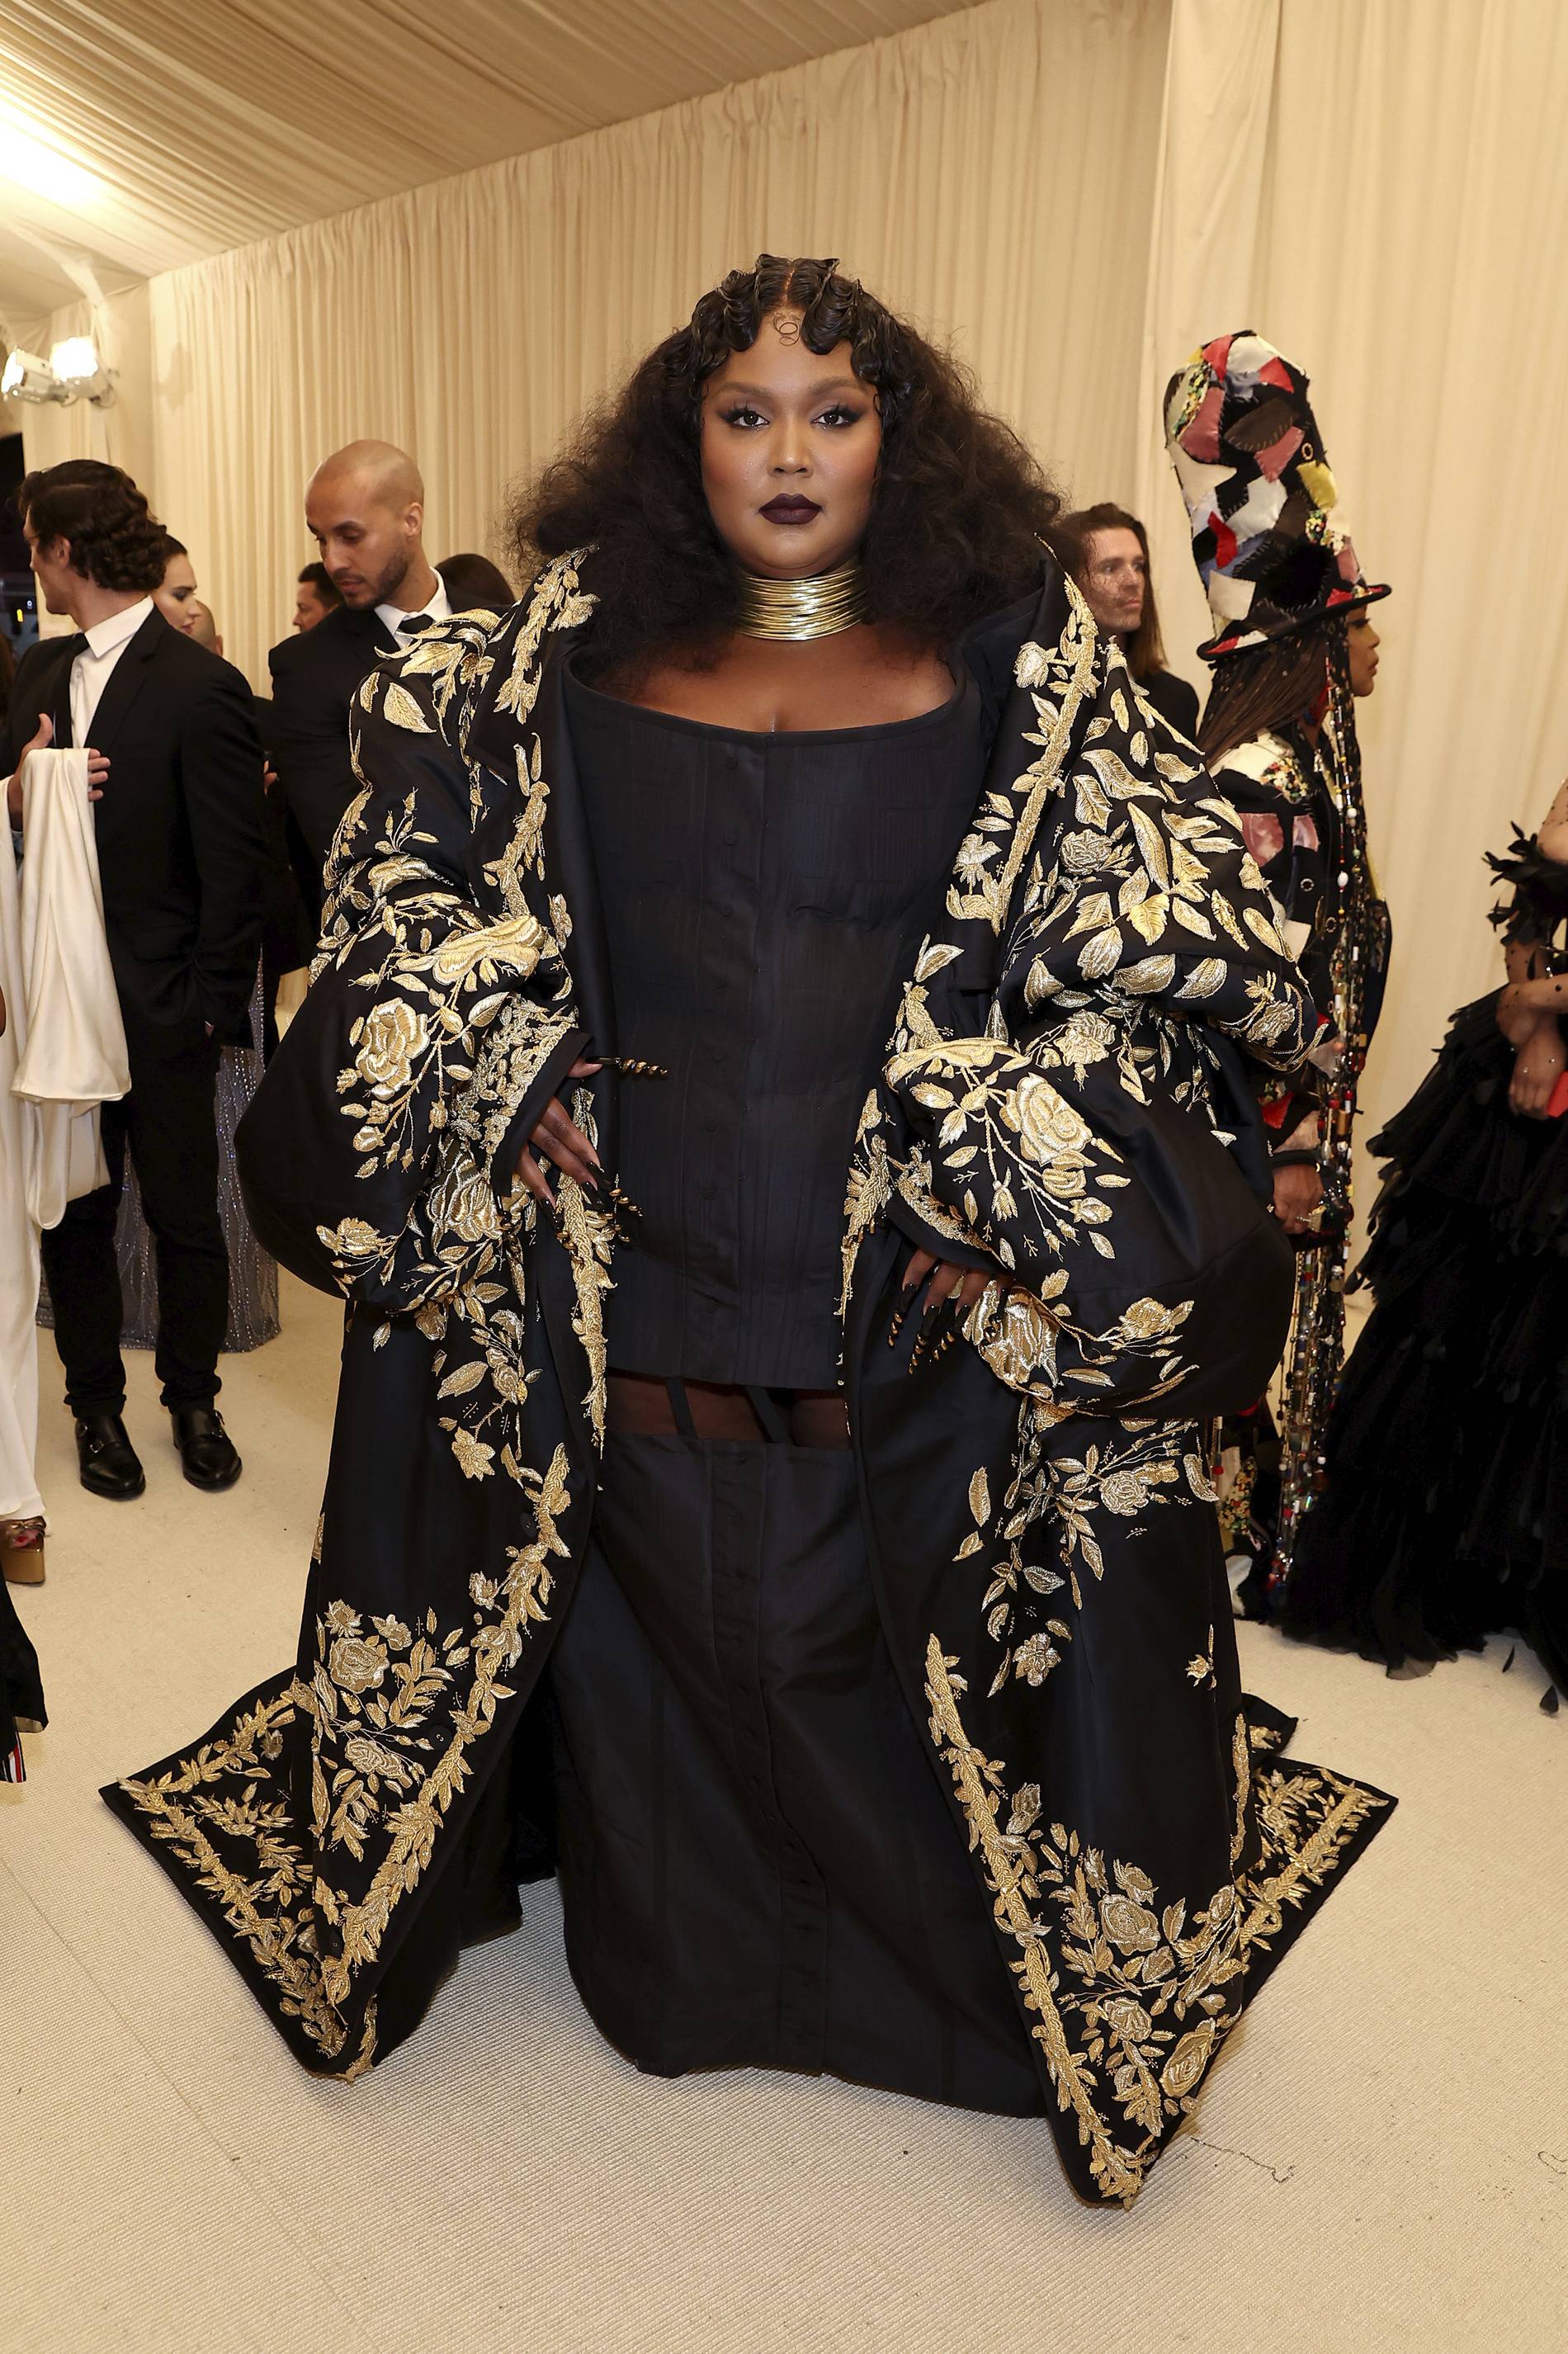 Lizzo at the Met Gala in 2022